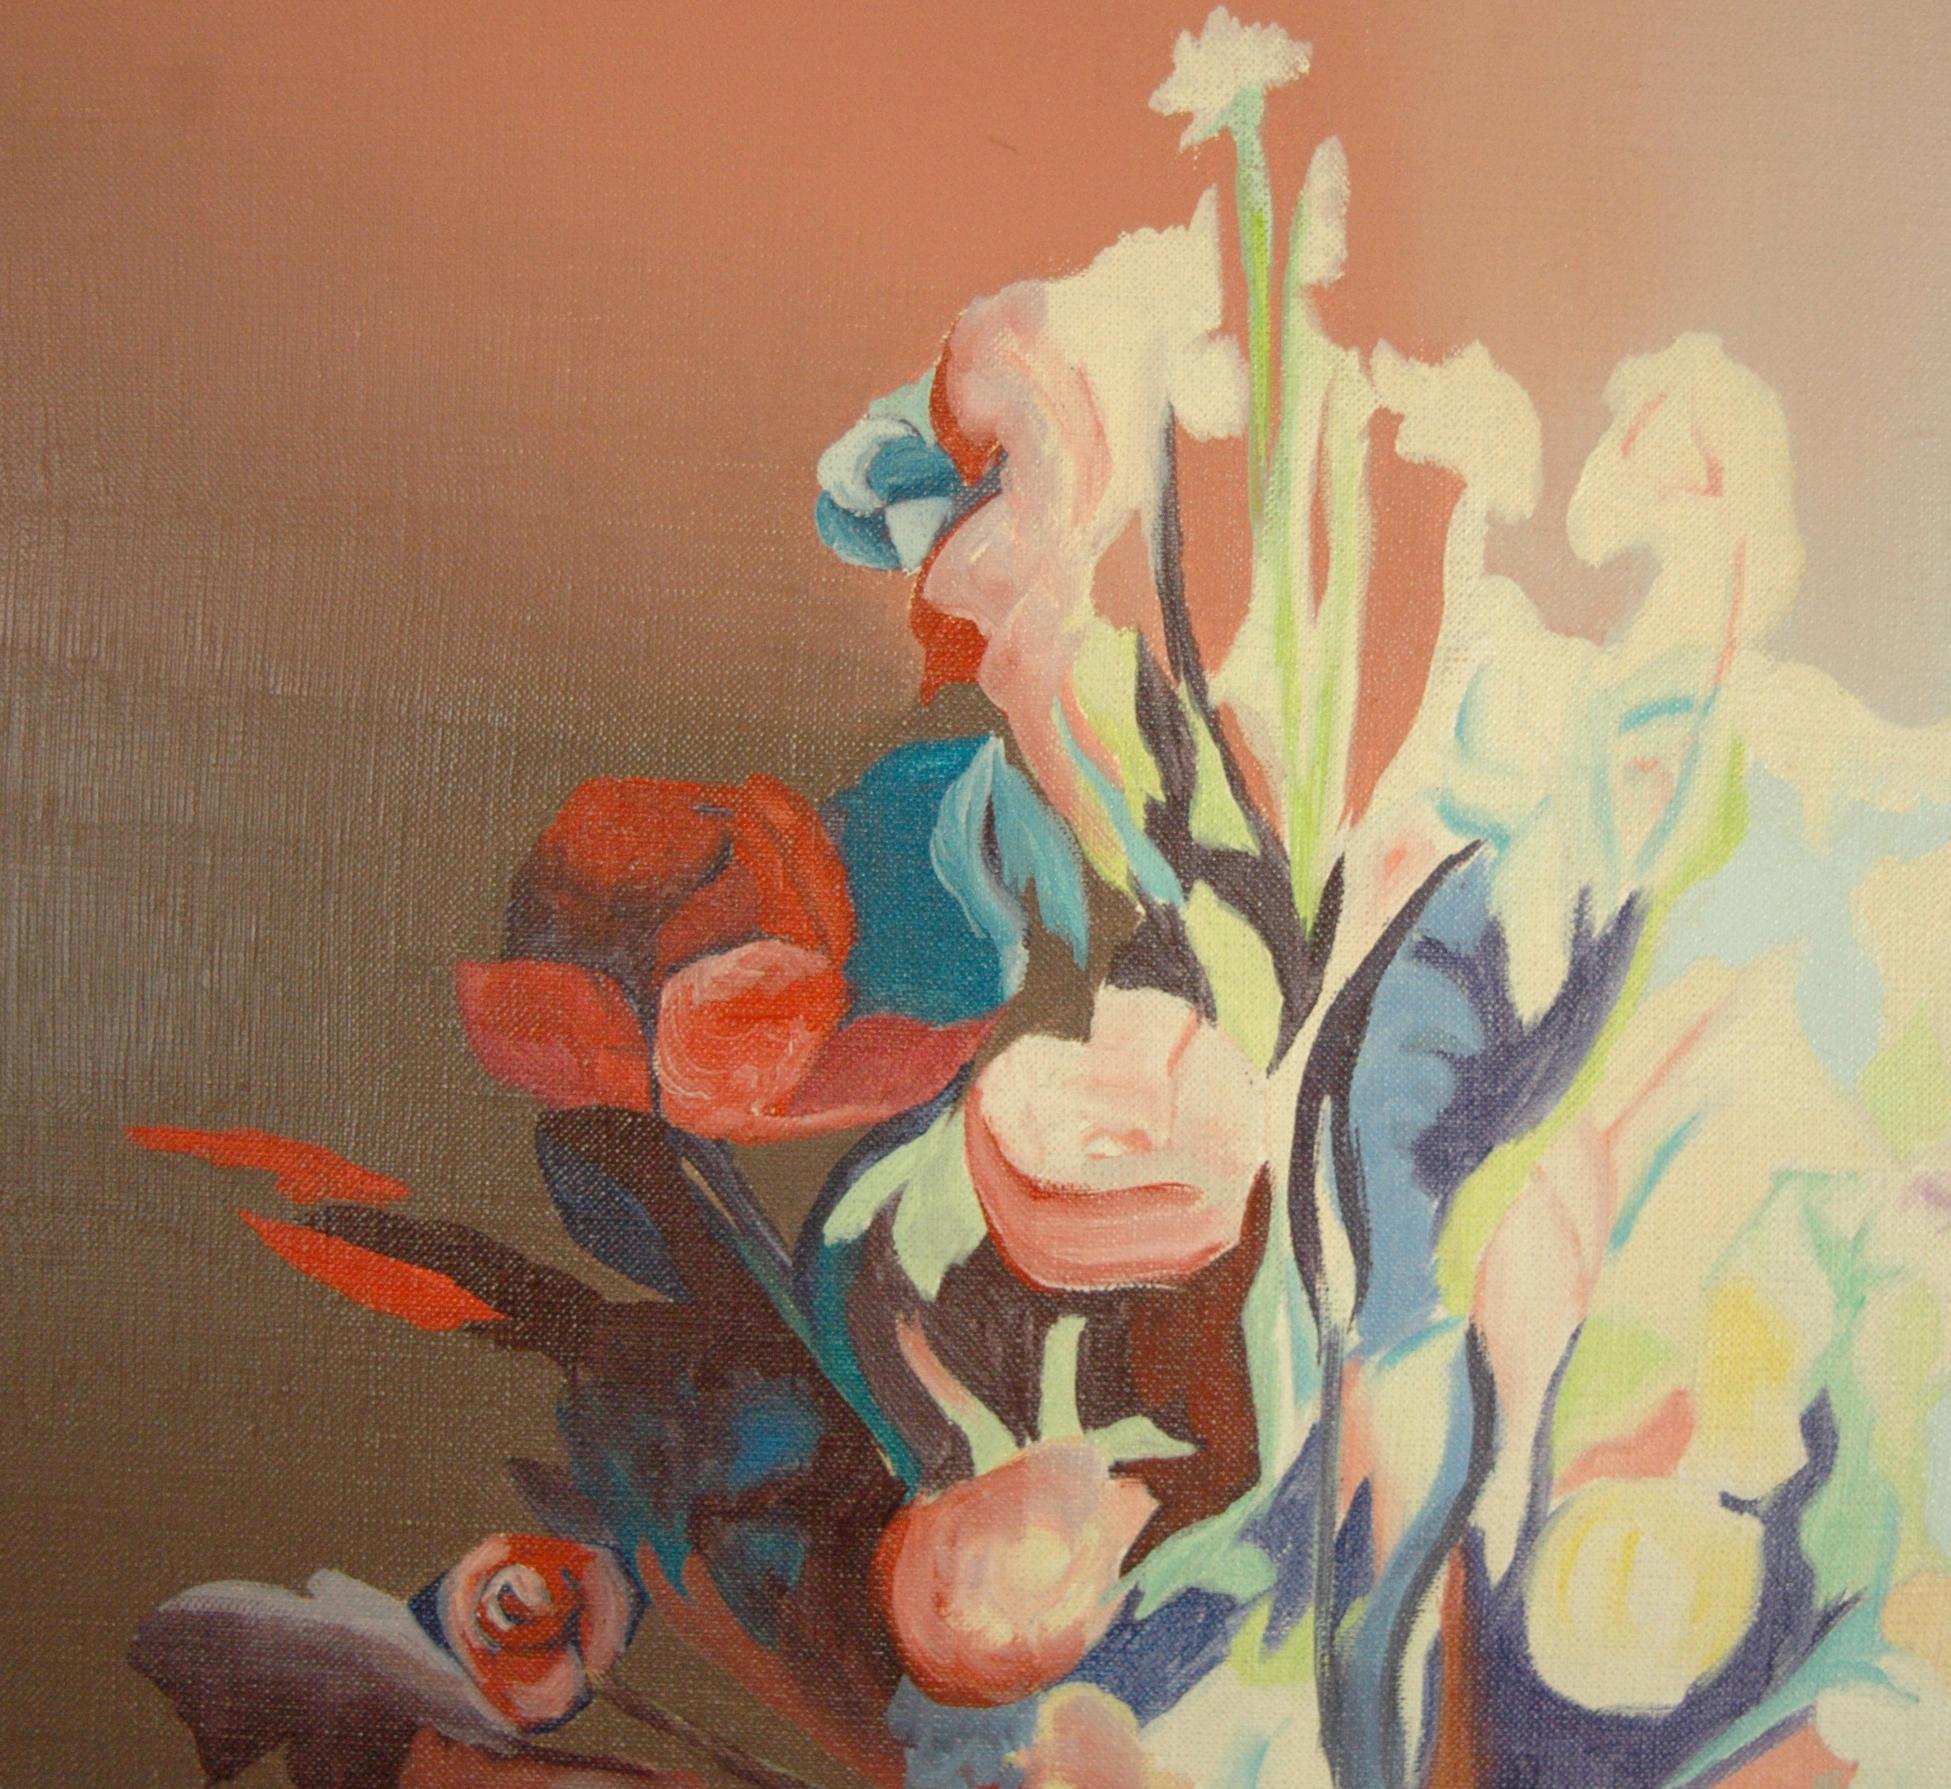  Le Bouquet - Brown Still-Life Painting by Louis Goldfarb